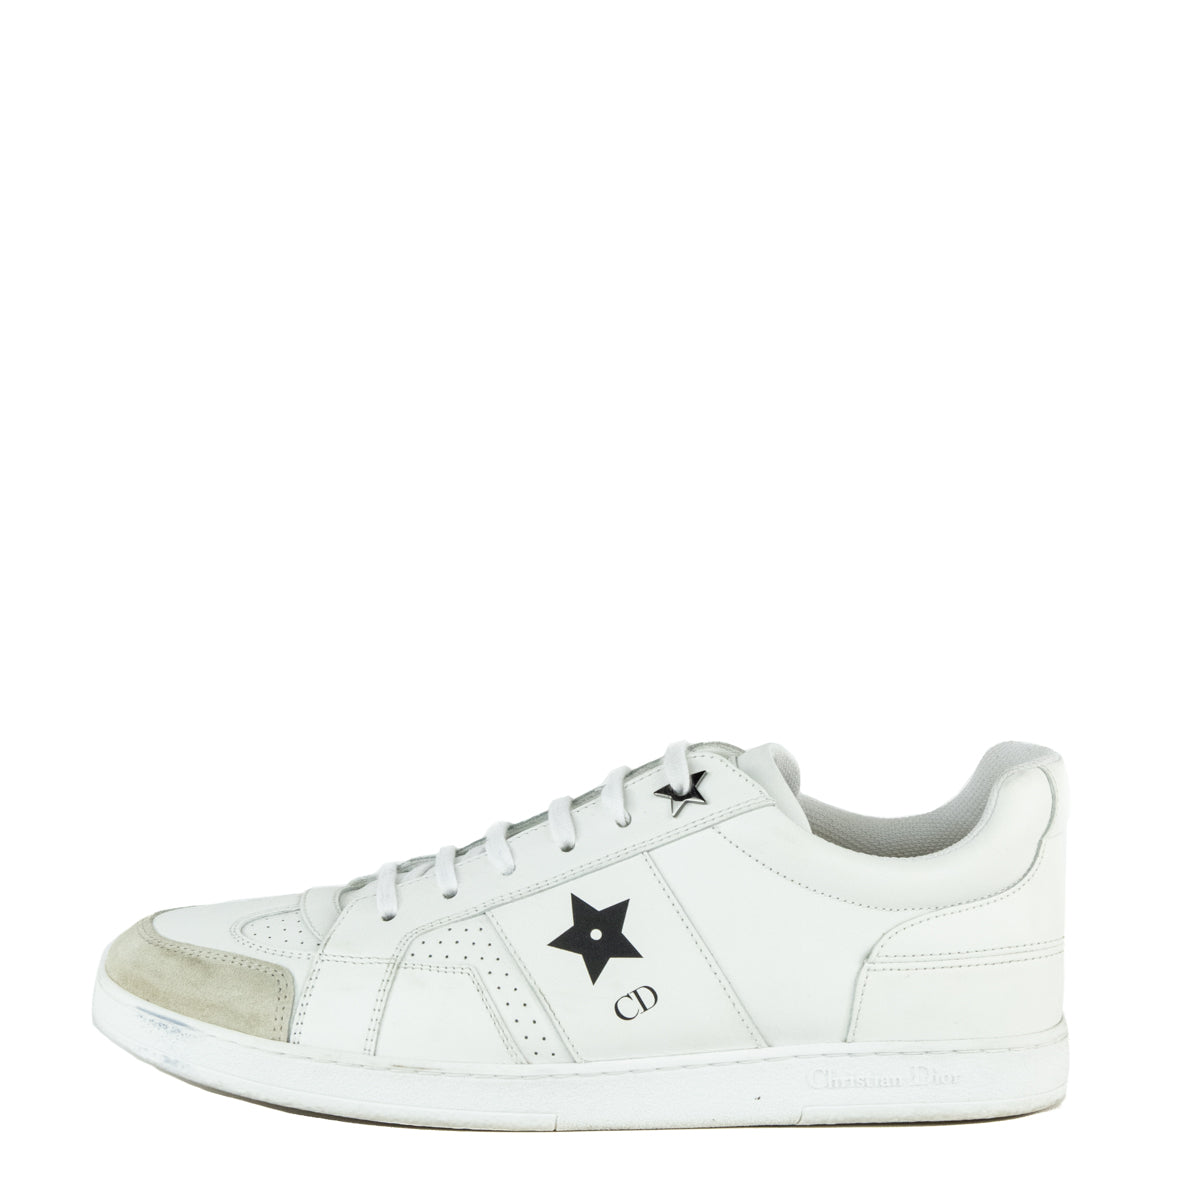 Dior White Leather Star Low Top Sneakers Size US 10 | EU 40 - Love that Bag etc - Preowned Authentic Designer Handbags & Preloved Fashions